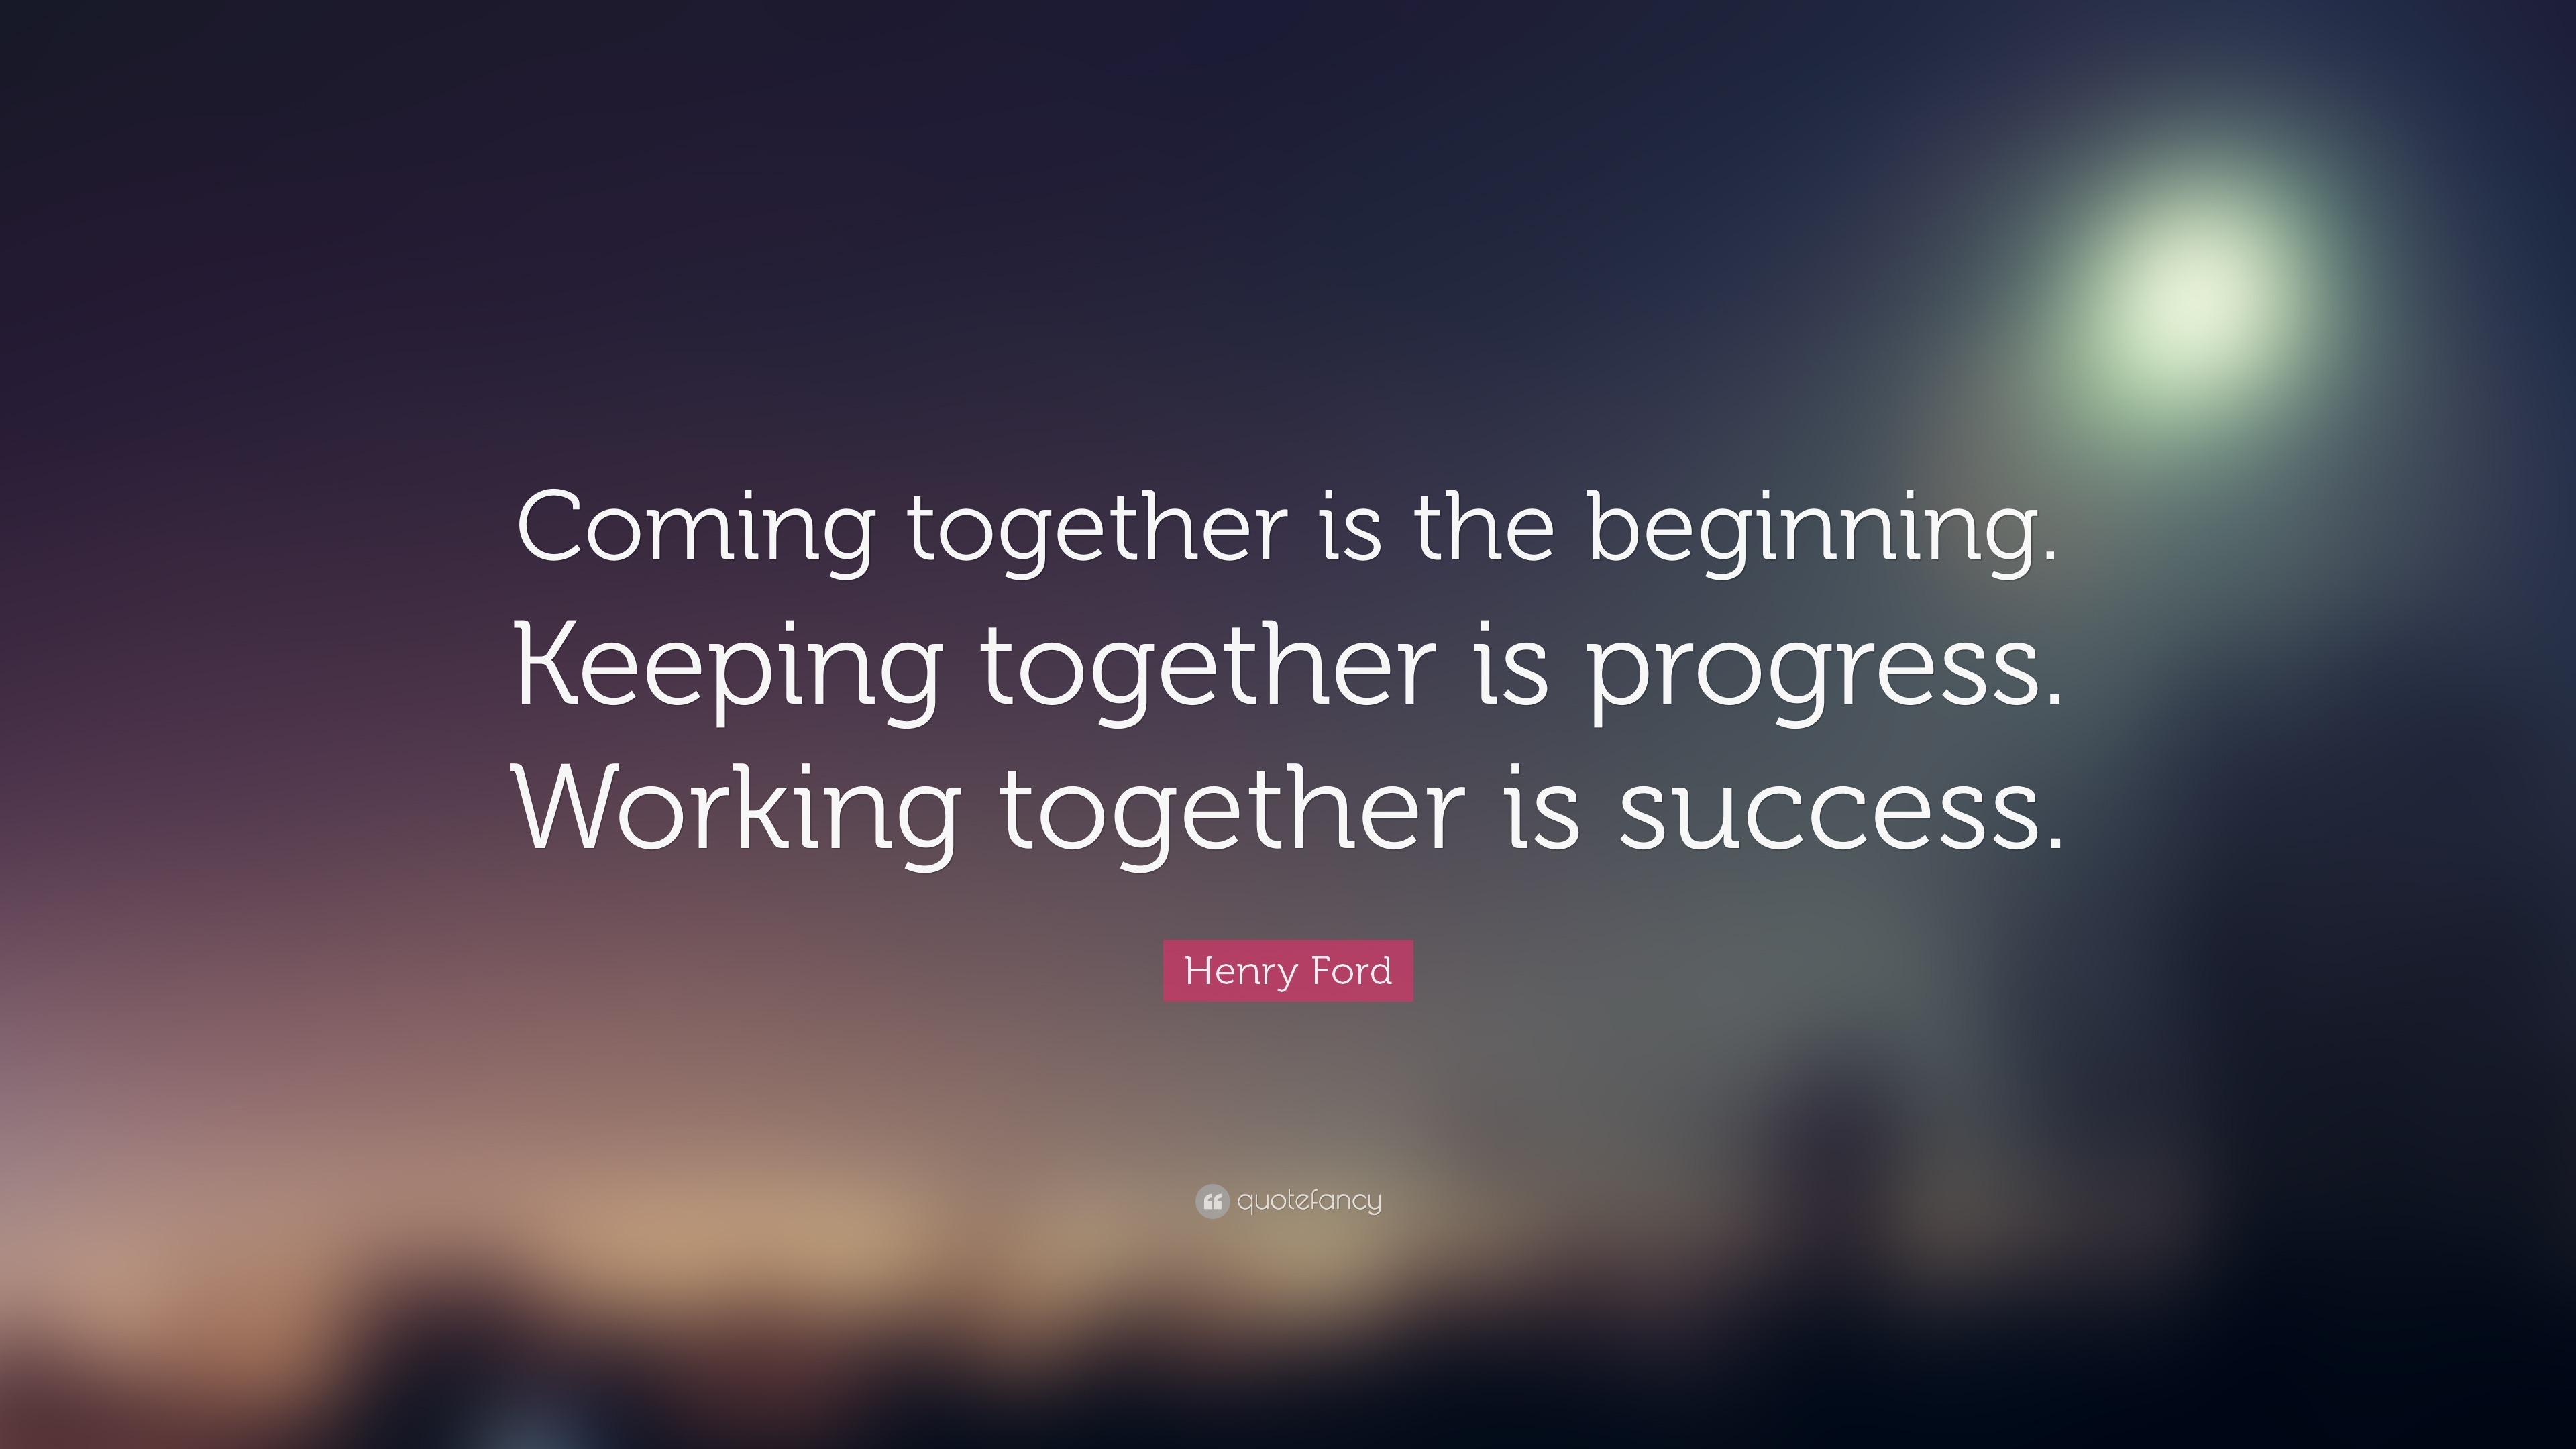 Henry Ford Quote: “Coming together is the beginning. Keeping together ...